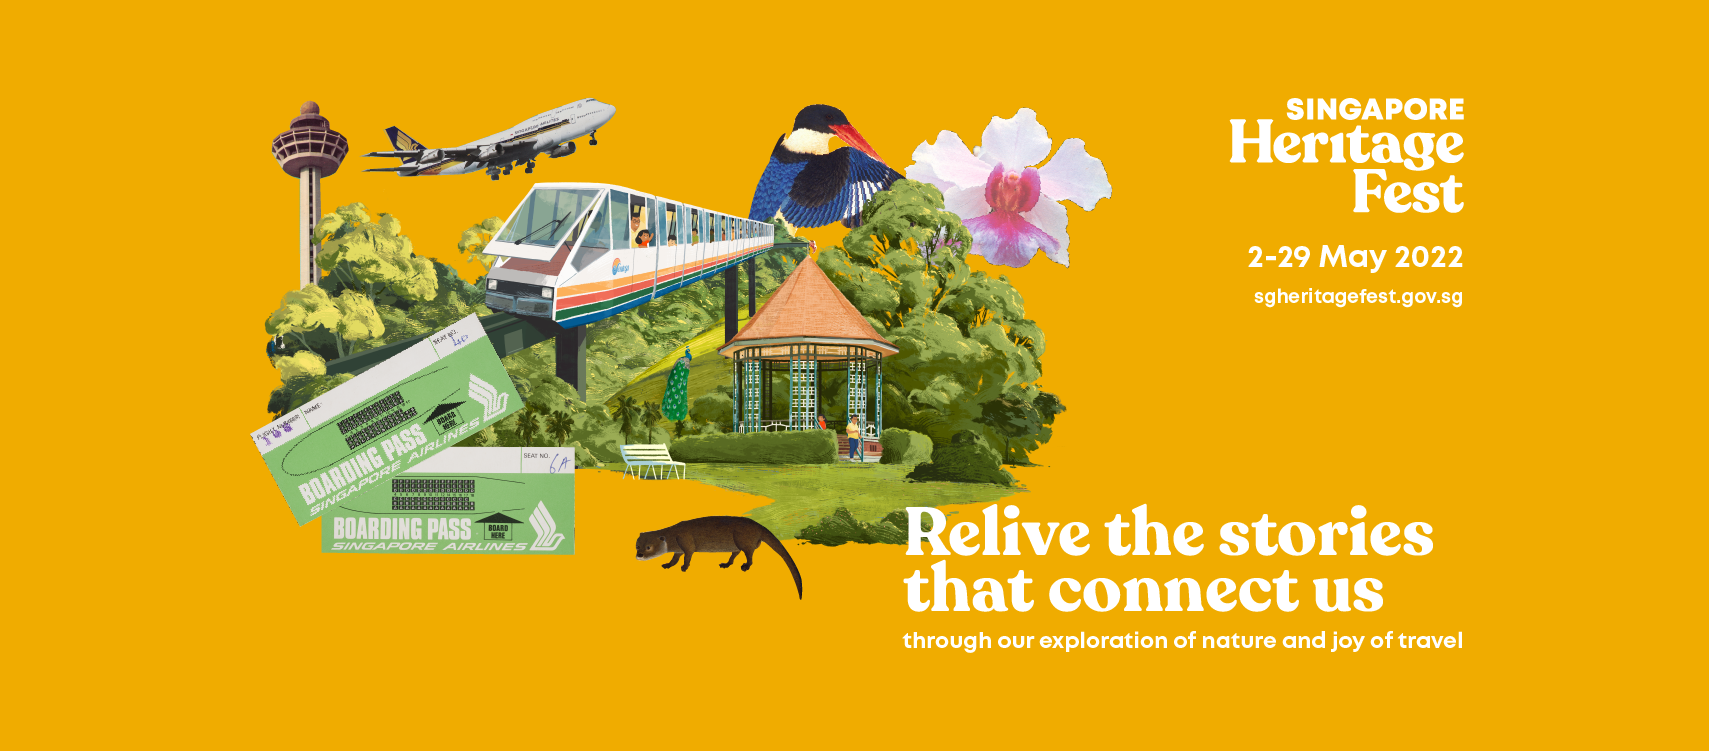 singapore heritage fest poster showcasing plane, bird, otter and nature